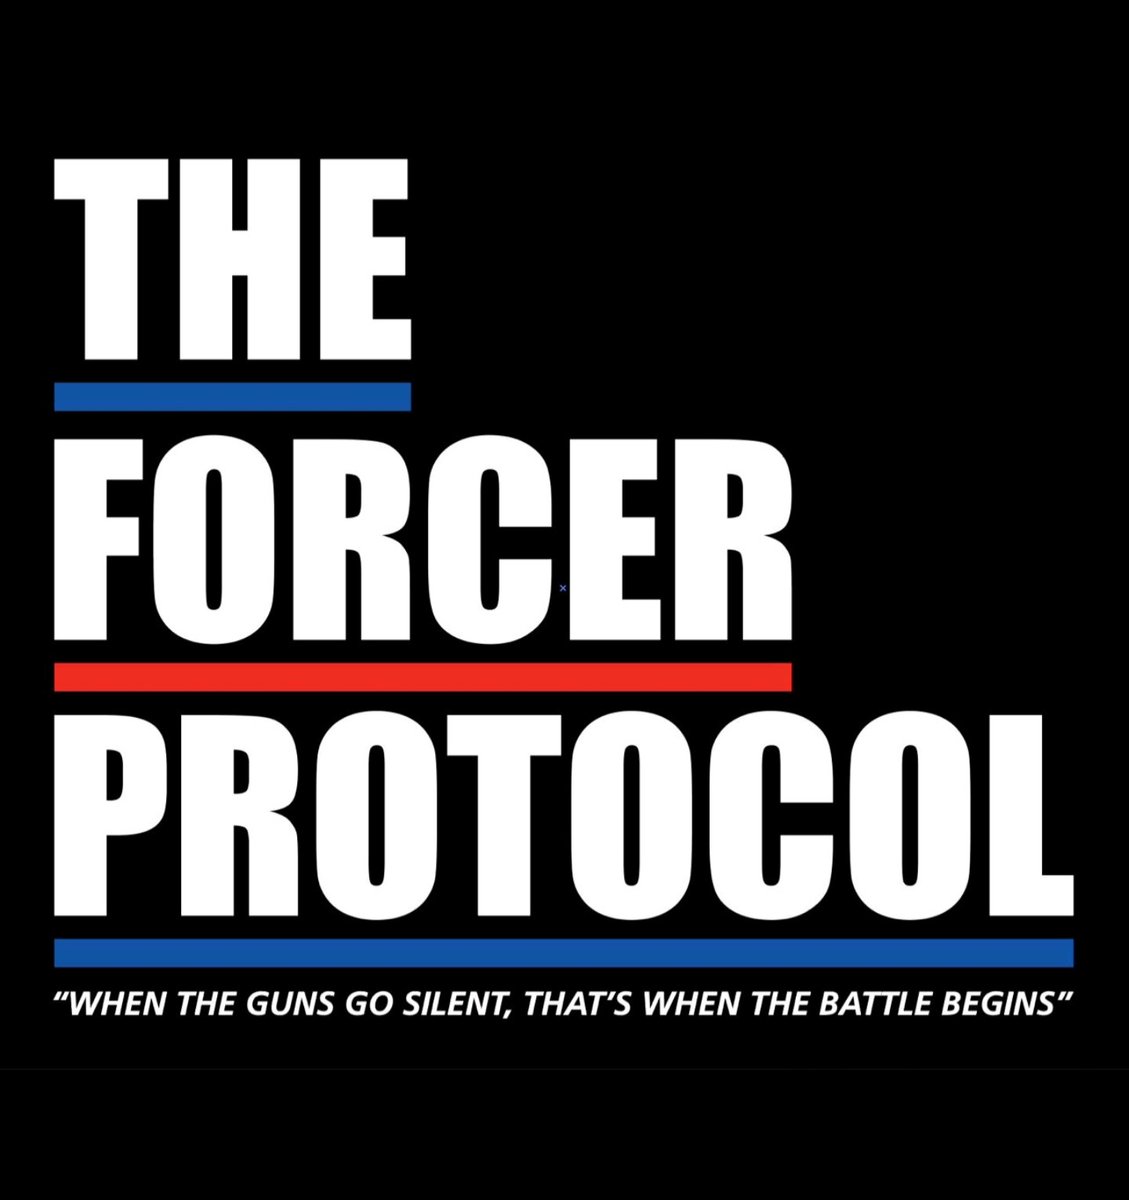 Today @gmpolice along with Claire Lilley & her team presented the #forcerprotocol to ministers & guests in Whitehall. The protocol which goes live in GMP on Armistice Day aims to improve missing person investigations for vulnerable veterans & reduce the number of suicides